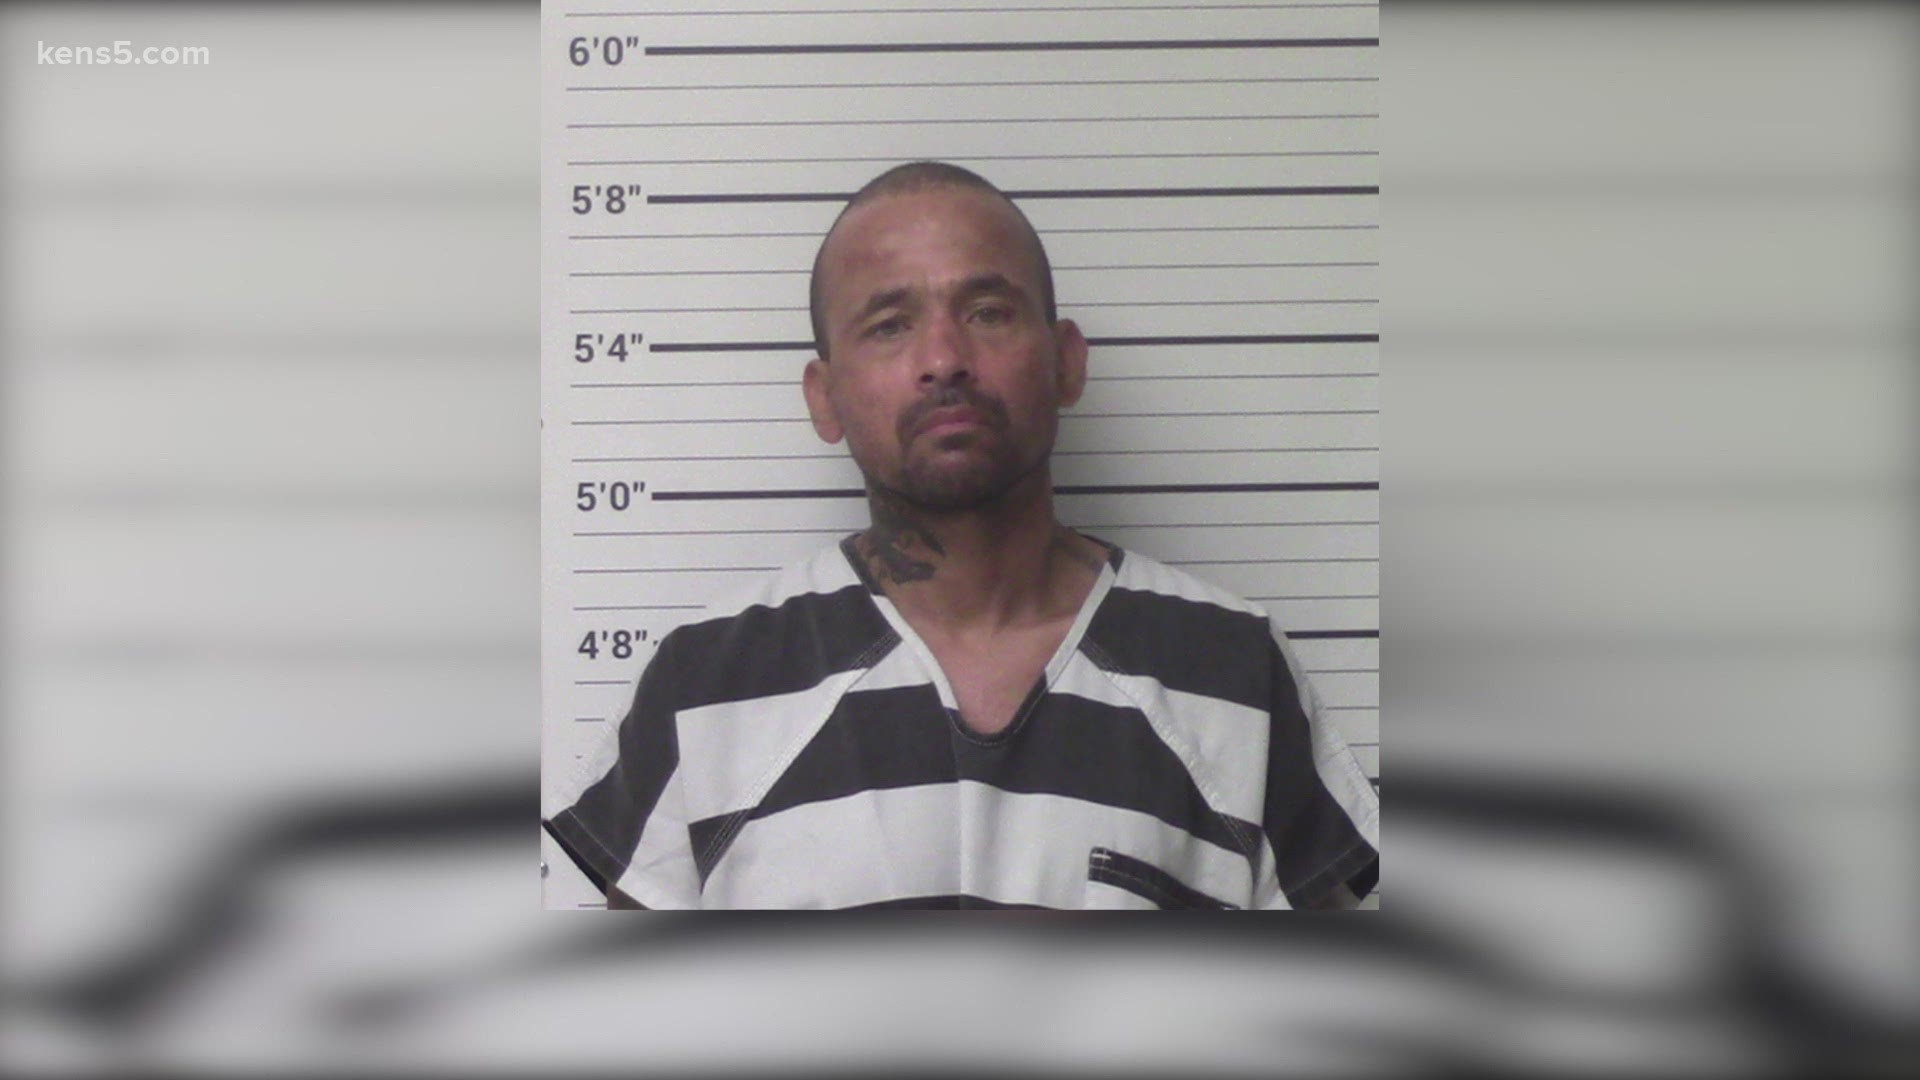 Marcelino Eli Esparza, age 48, has been charged with the murder of Margie Arguijo, also from Poteet.